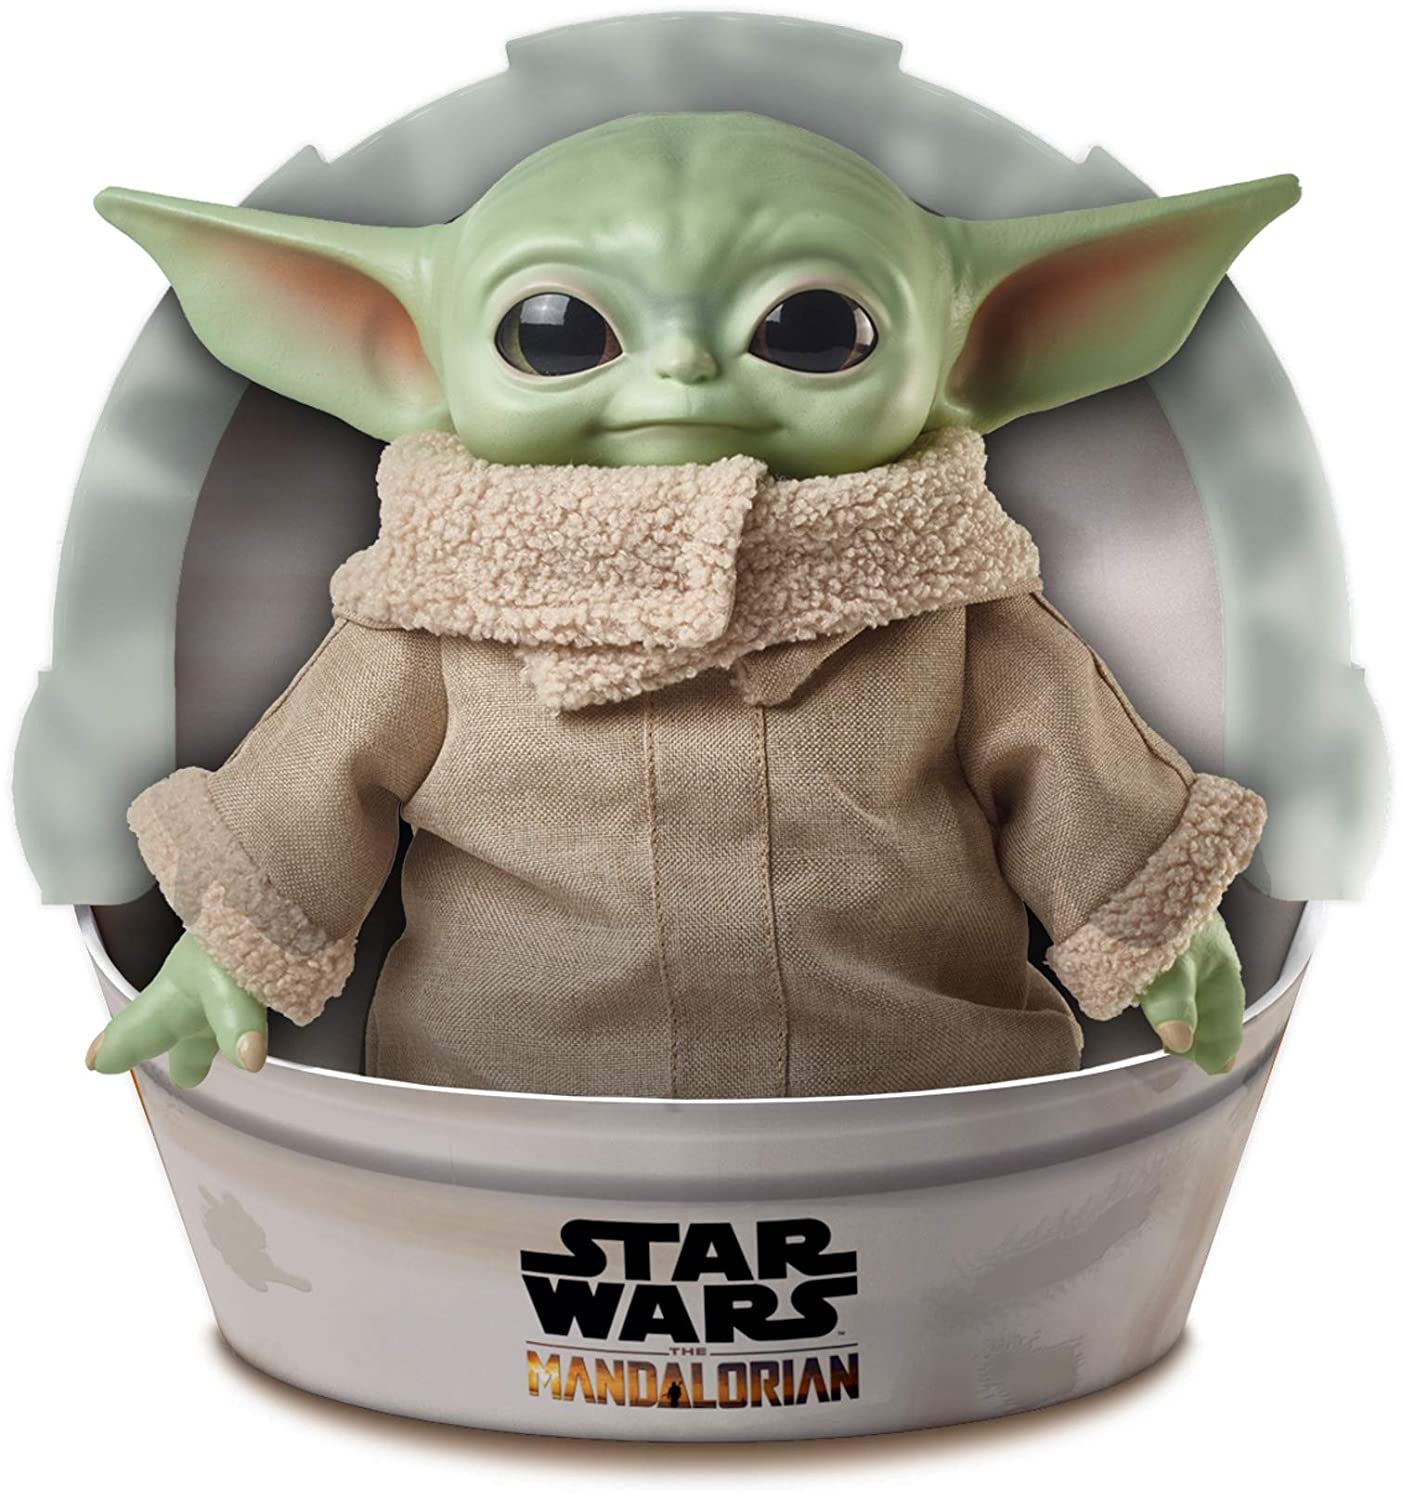 11" Star Wars: The Mandalorian The Child Plush Toy (Baby Yoda) for $15.99